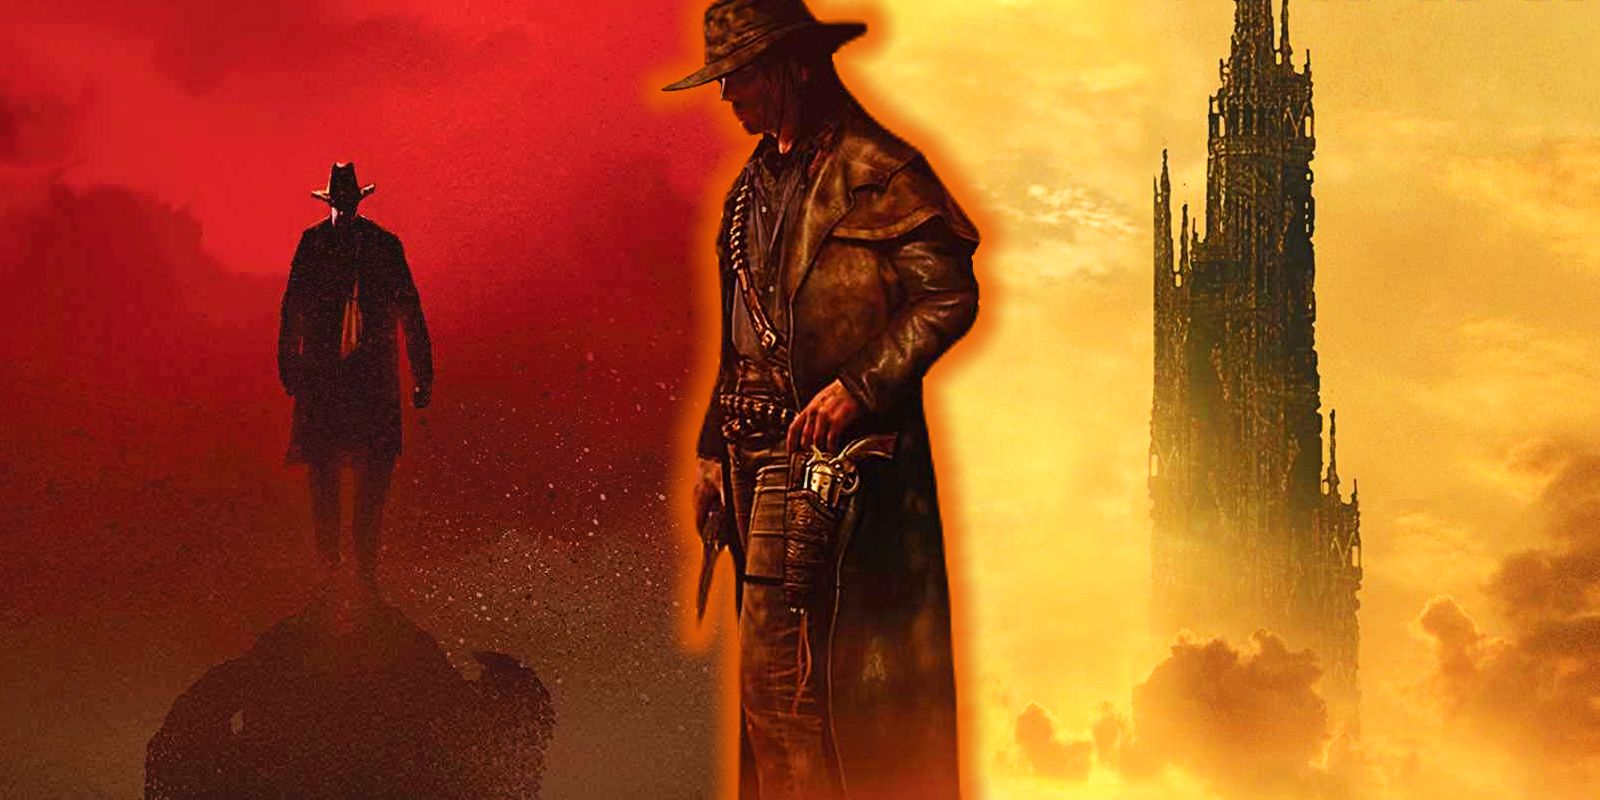 This custom image shows the cover of two Dark Tower books with the gunslinger.